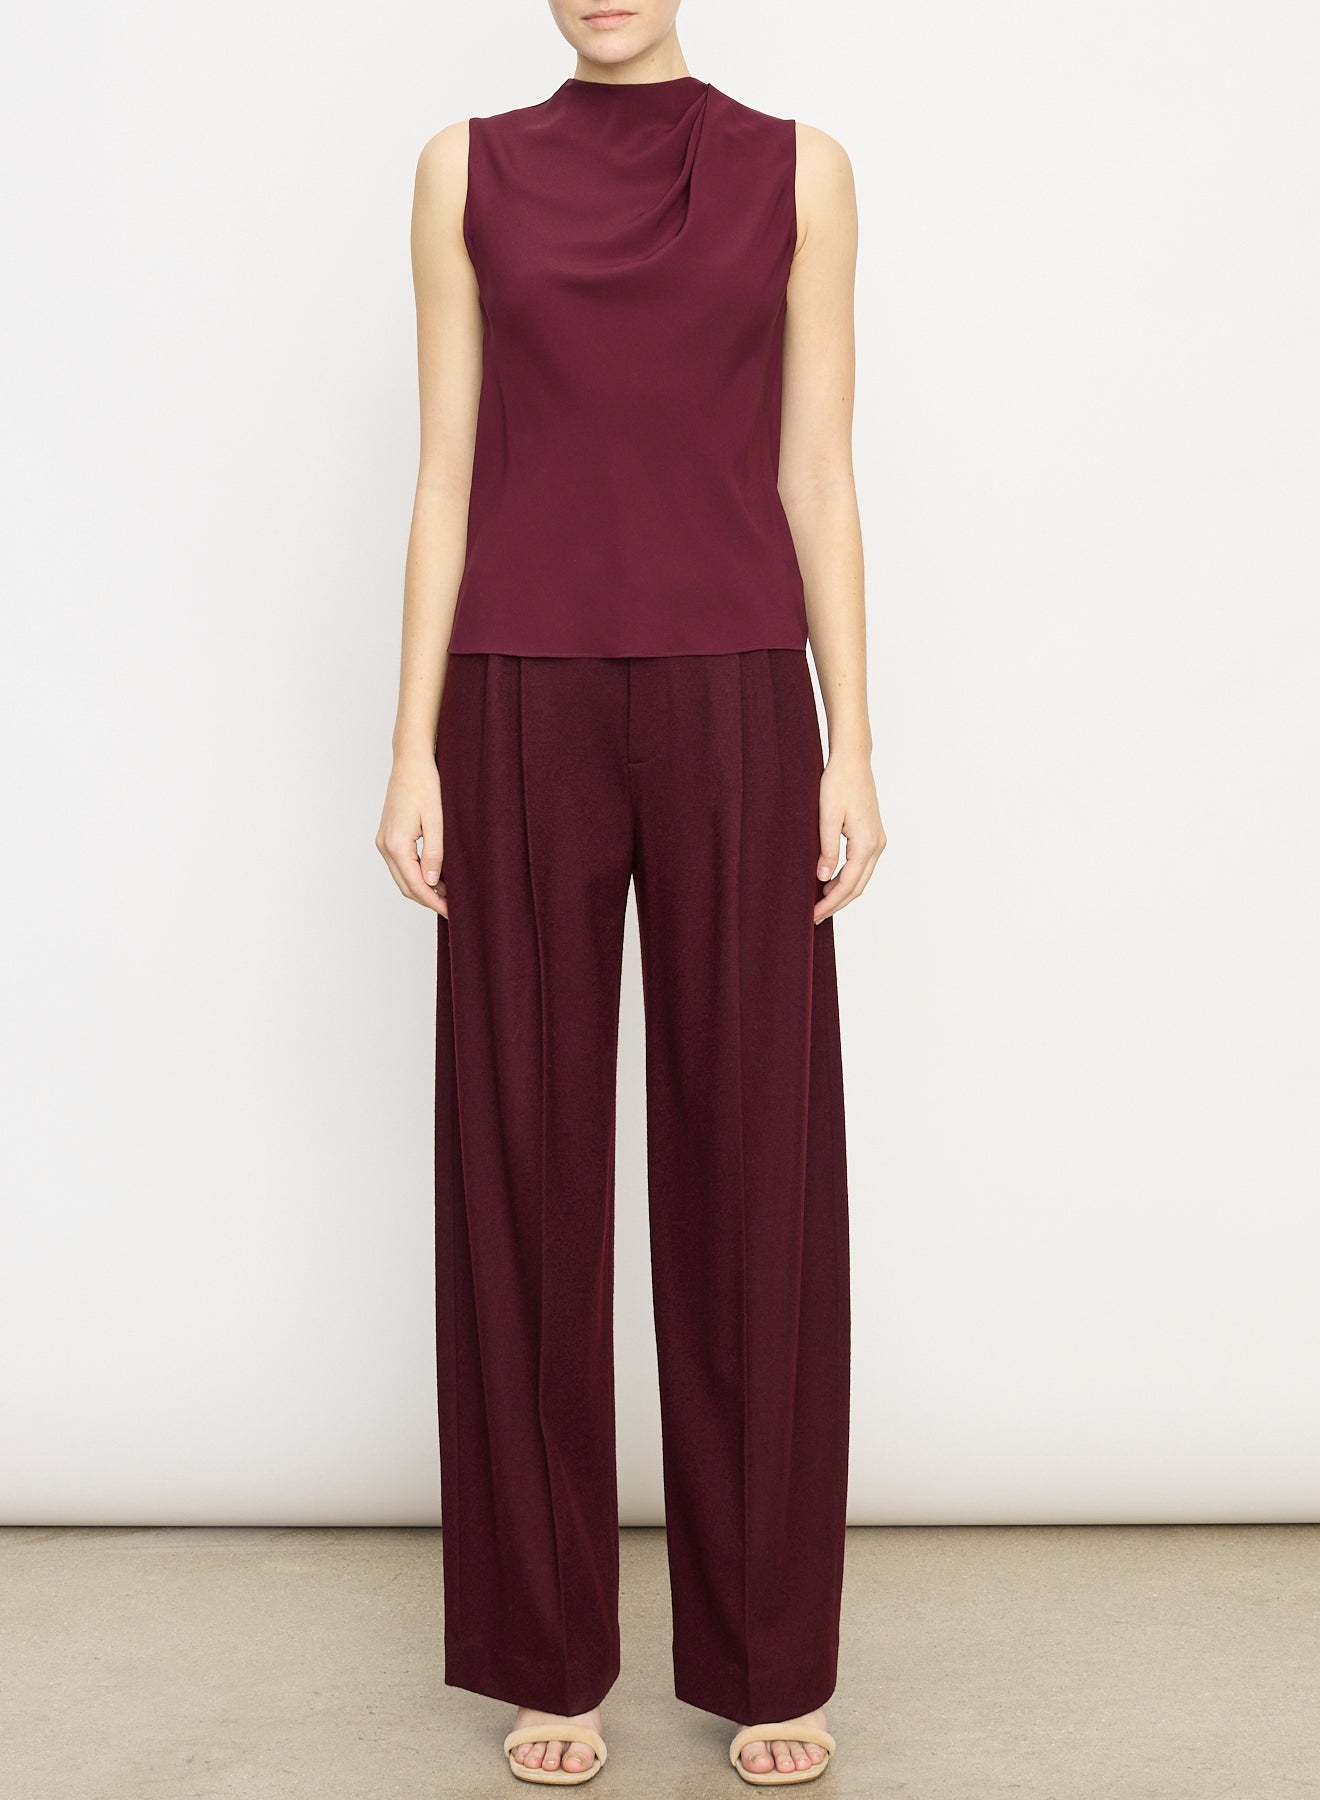 DRAPED CASCADE SLEEVELESS BLOUSE IN CHERRY WINE - Romi Boutique